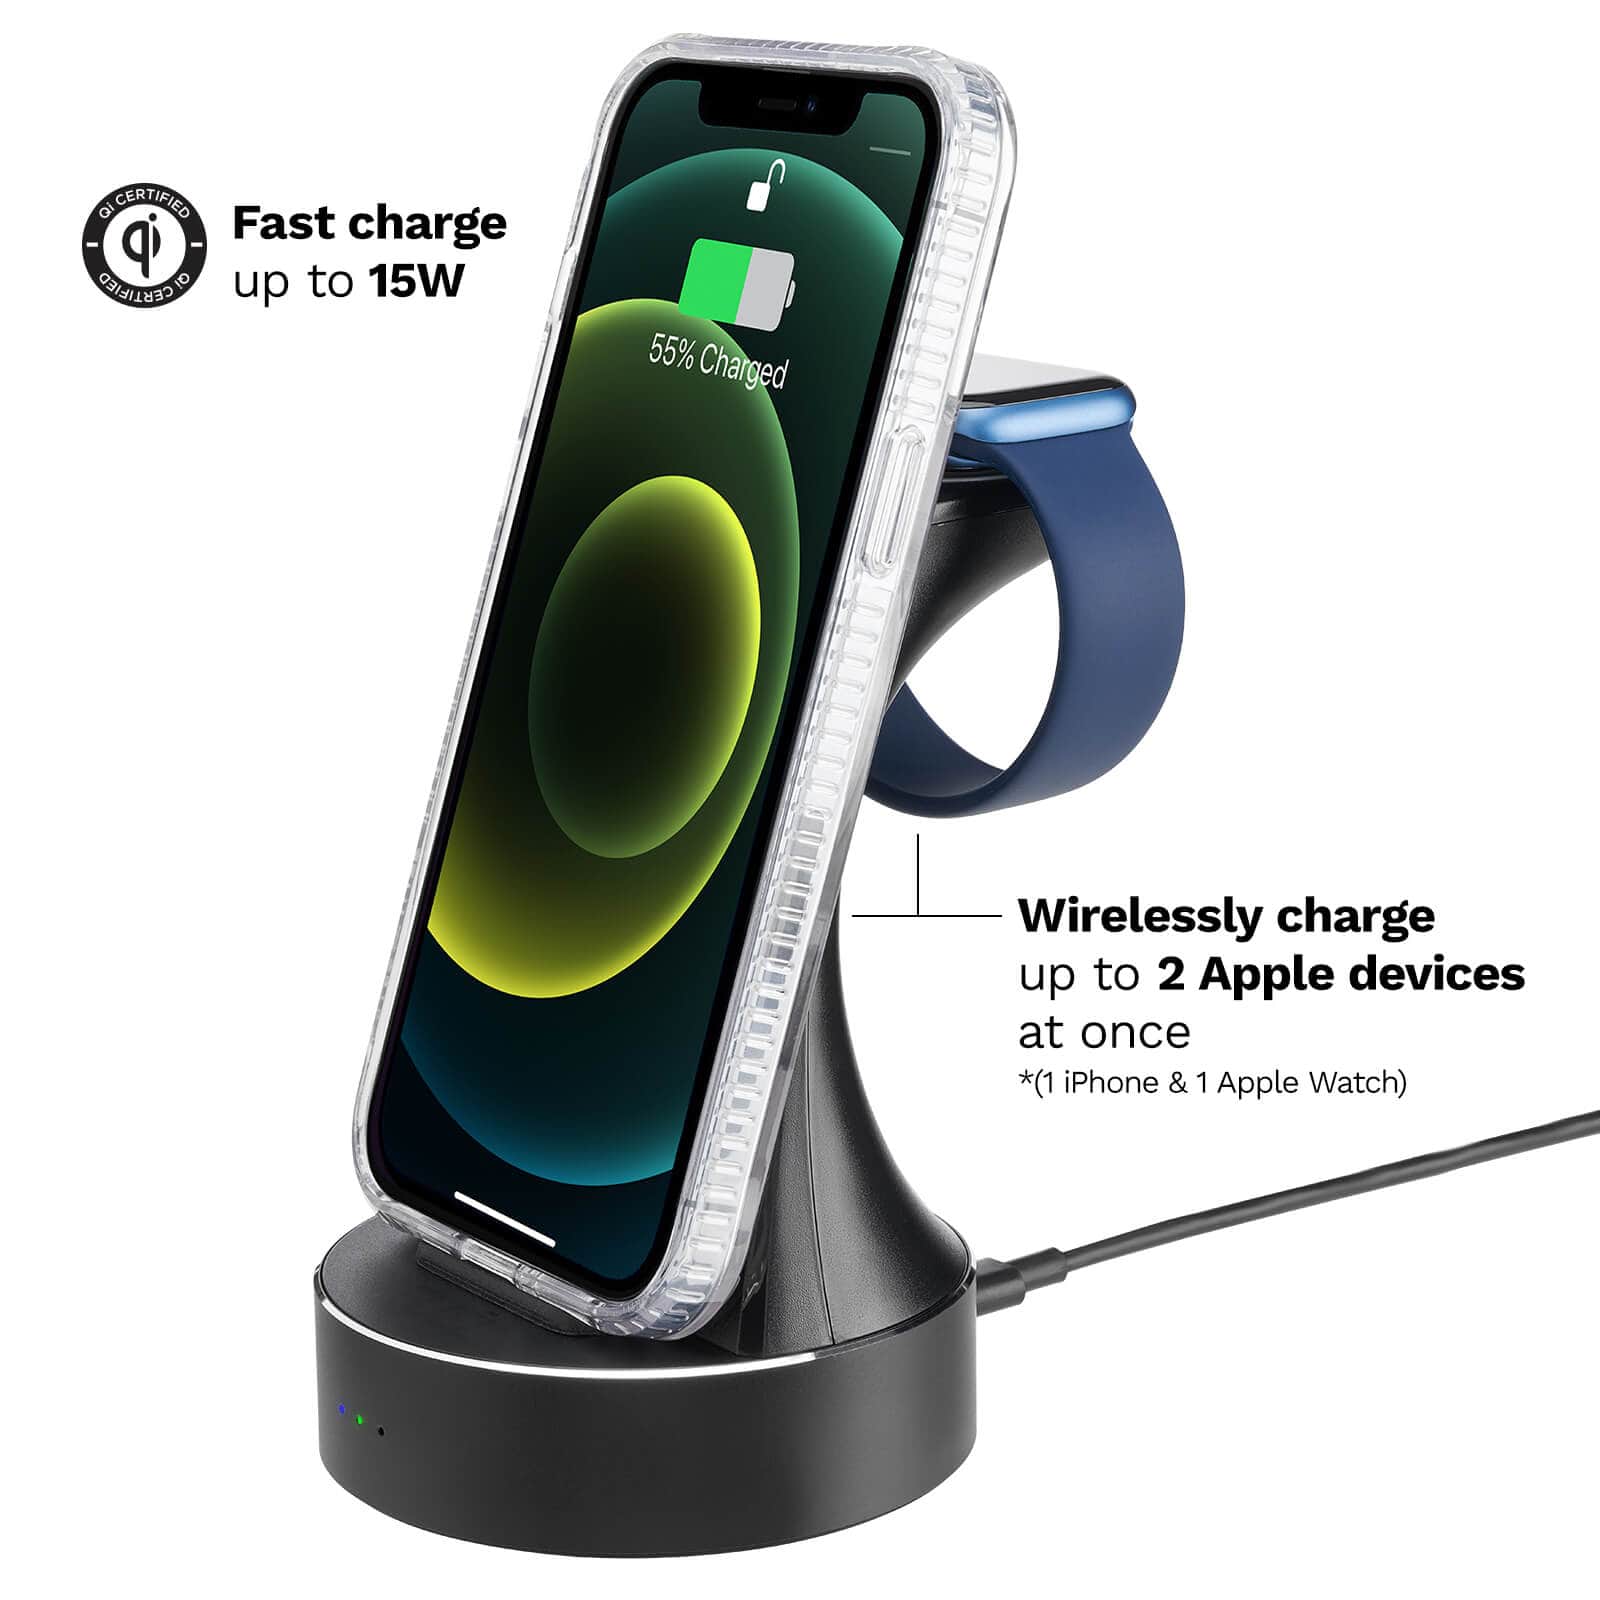 QI CERTIFIED FAST CHARGE UP TO 15W. WIRELESSLY CHARGE UP TO 2 APPLE DEVICES AT ONCE *(1 IPHONE & 1 APPLE WATCH) COLOR::BLACK